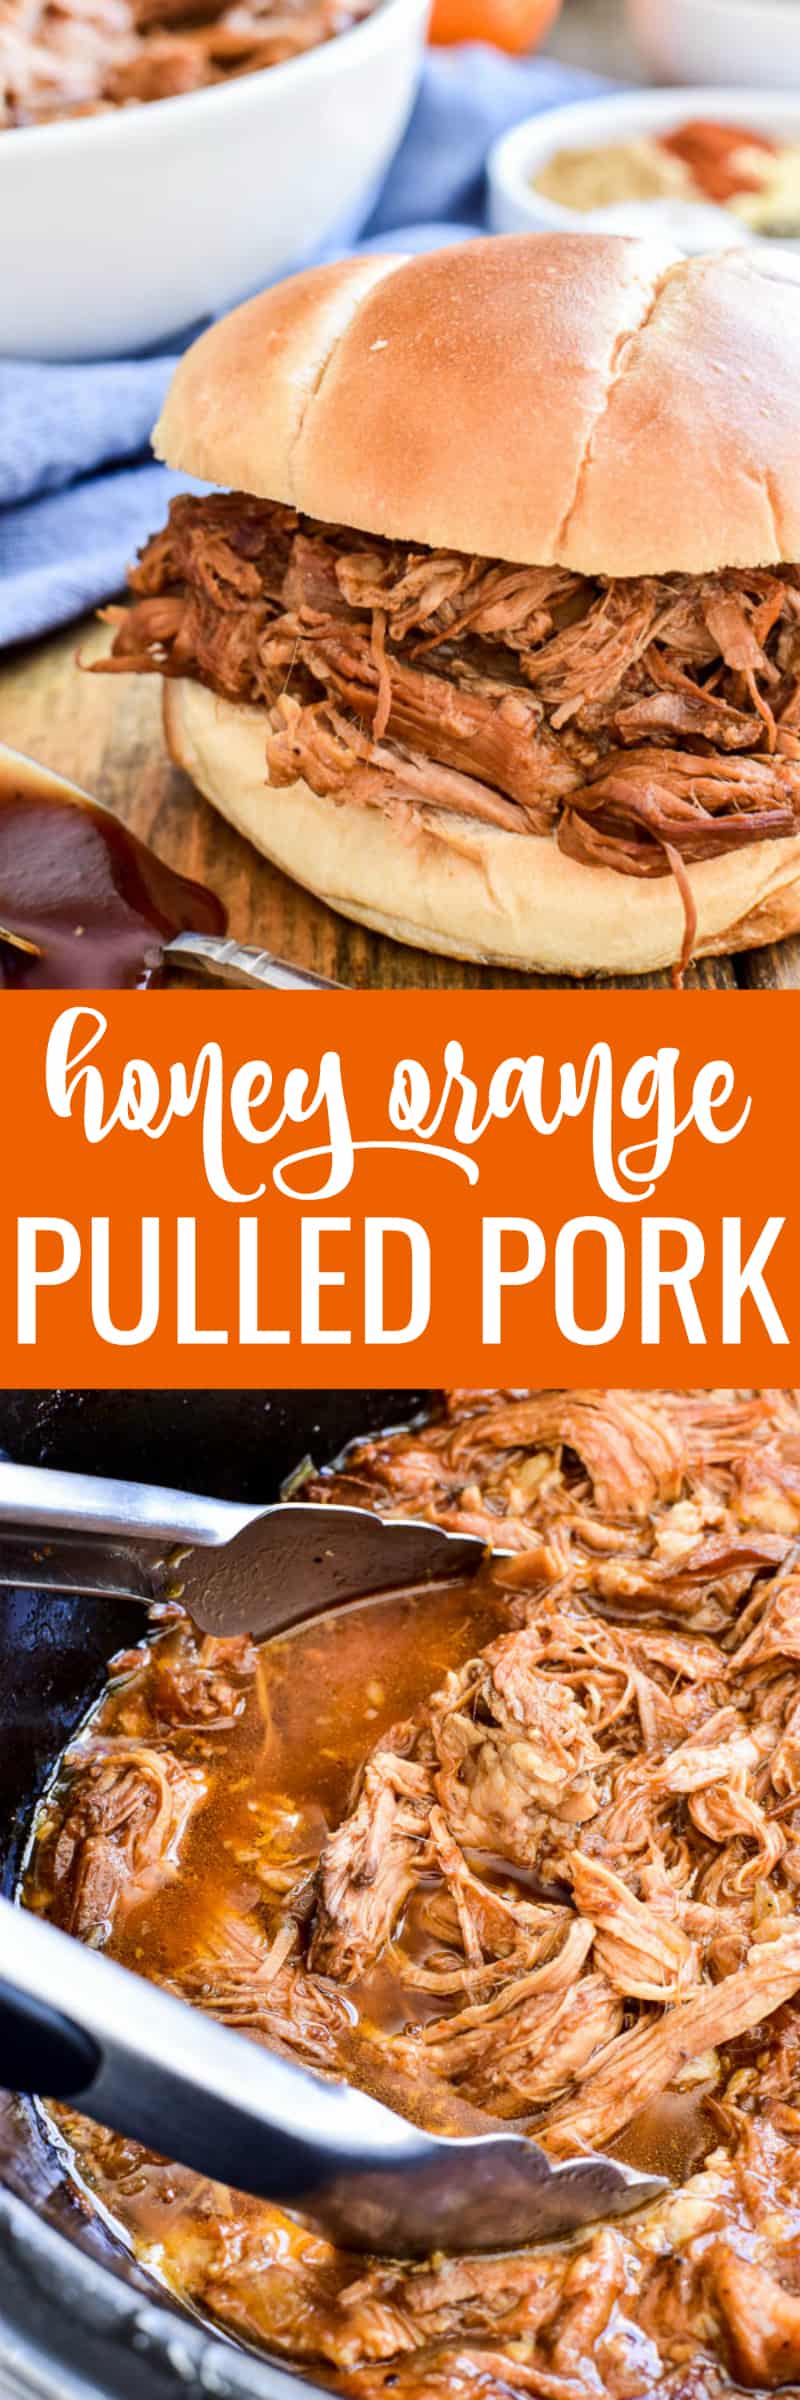 Collage image of Honey Orange Pulled Pork in slow cooker and sandwich